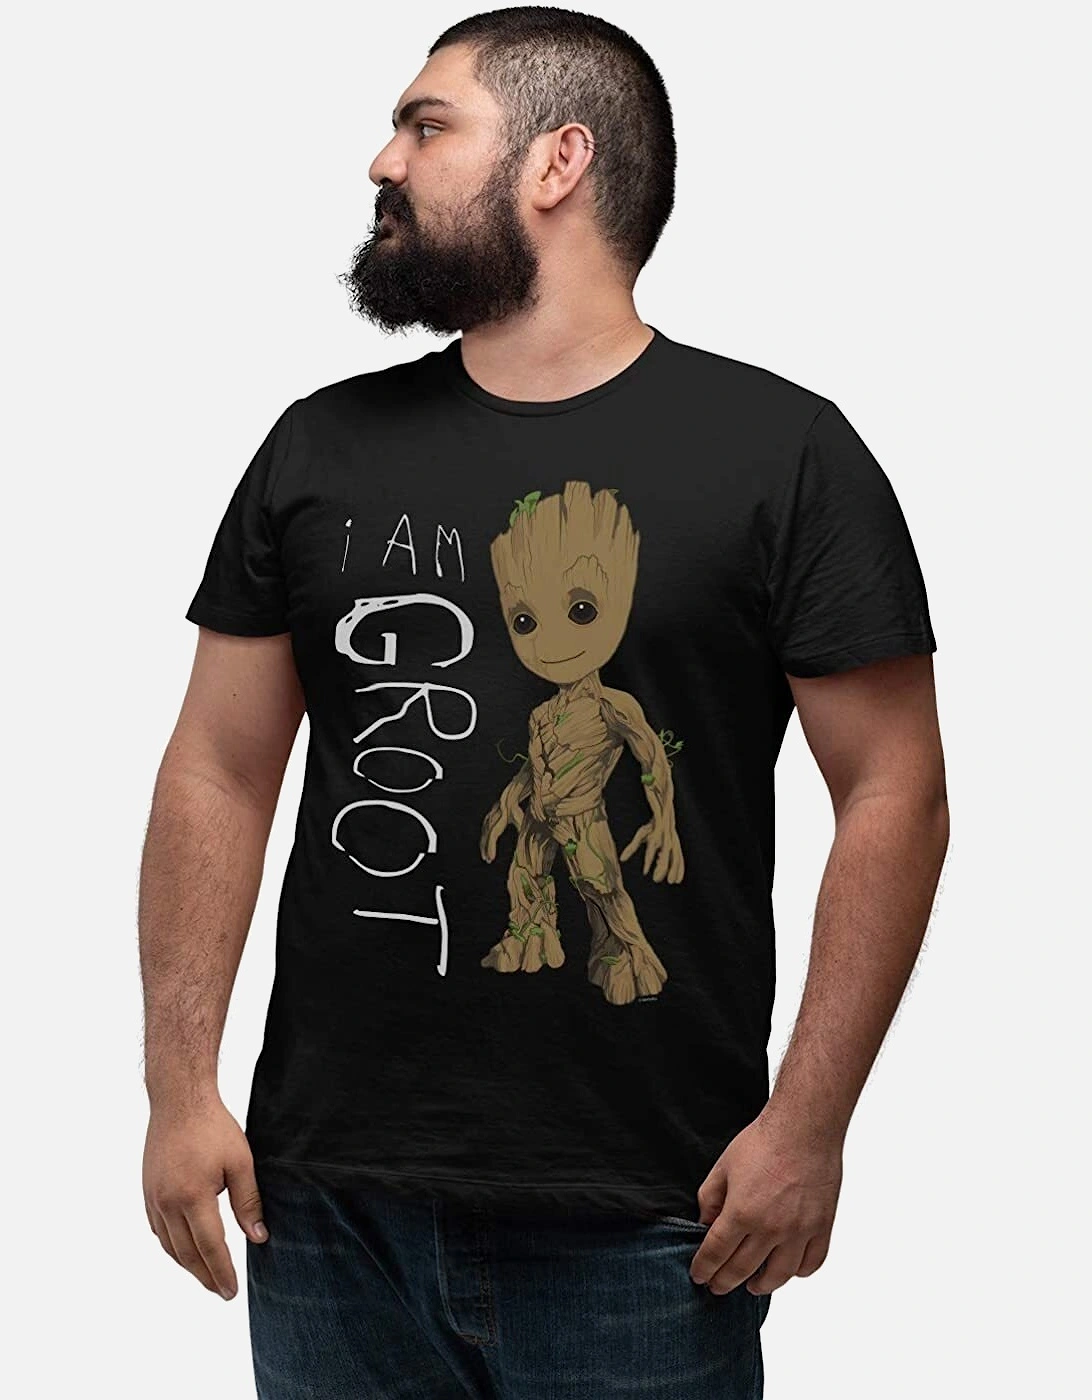 Unisex Adult I Am Groot Scribble T-Shirt